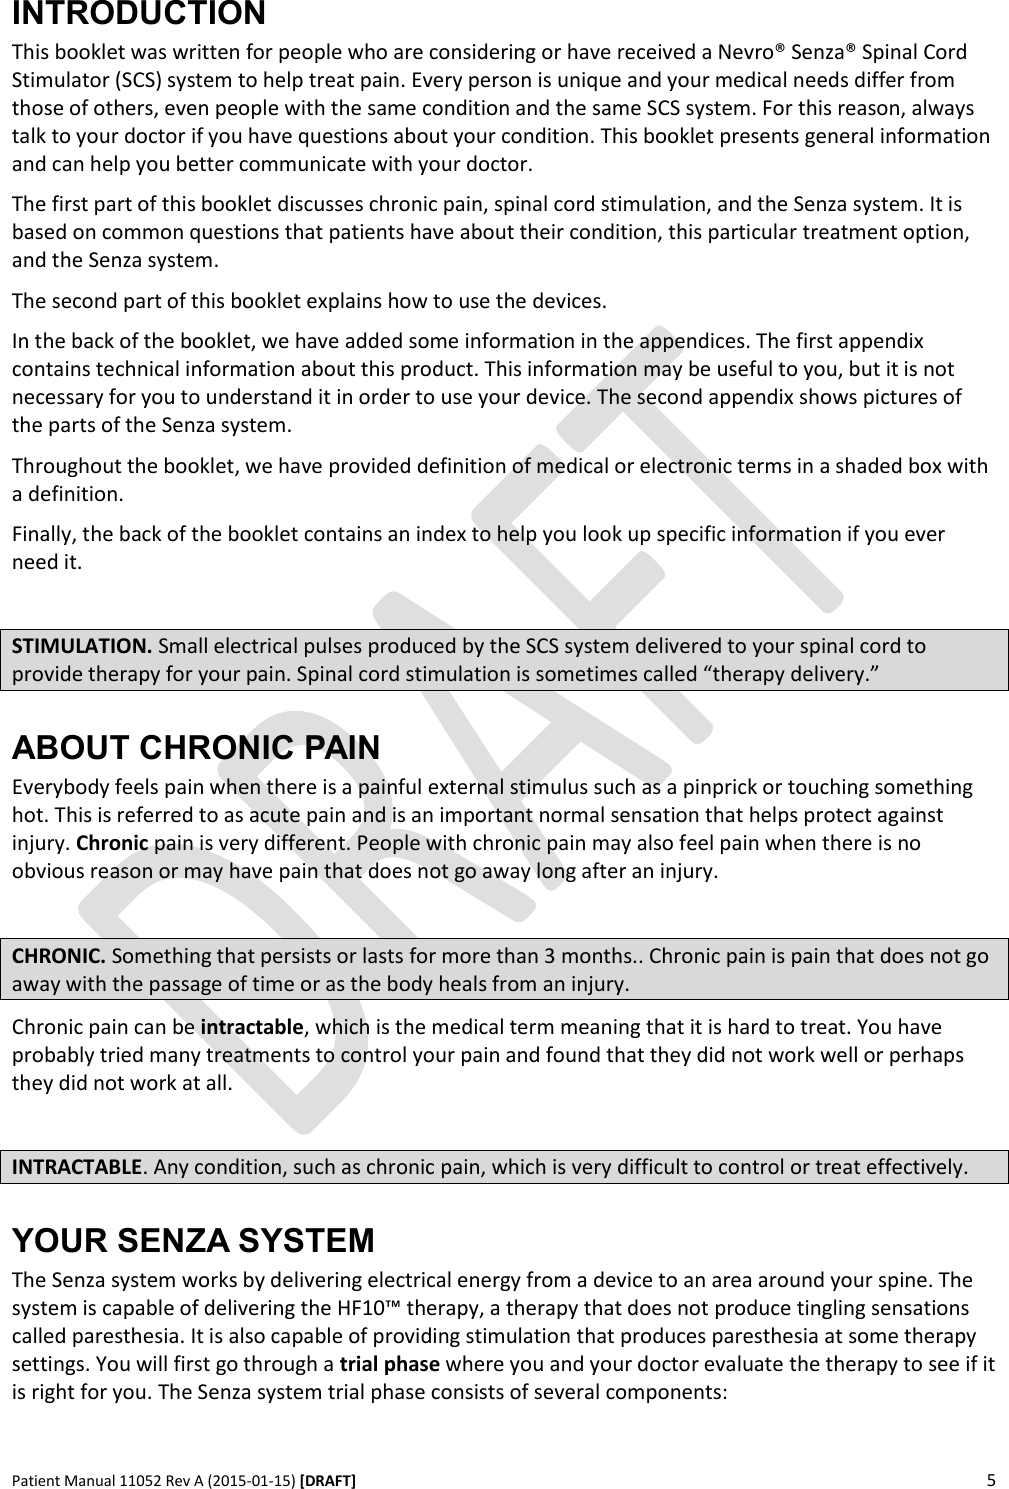      Patient Manual 11052 Rev A (2015-01-15) [DRAFT] 5   INTRODUCTION This booklet was written for people who are considering or have received a Nevro® Senza® Spinal Cord Stimulator (SCS) system to help treat pain. Every person is unique and your medical needs differ from those of others, even people with the same condition and the same SCS system. For this reason, always talk to your doctor if you have questions about your condition. This booklet presents general information and can help you better communicate with your doctor. The first part of this booklet discusses chronic pain, spinal cord stimulation, and the Senza system. It is based on common questions that patients have about their condition, this particular treatment option, and the Senza system. The second part of this booklet explains how to use the devices. In the back of the booklet, we have added some information in the appendices. The first appendix contains technical information about this product. This information may be useful to you, but it is not necessary for you to understand it in order to use your device. The second appendix shows pictures of the parts of the Senza system. Throughout the booklet, we have provided definition of medical or electronic terms in a shaded box with a definition. Finally, the back of the booklet contains an index to help you look up specific information if you ever need it.  STIMULATION. Small electrical pulses produced by the SCS system delivered to your spinal cord to provide therapy for your pain. Spinal cord stimulation is sometimes called “therapy delivery.” ABOUT CHRONIC PAIN Everybody feels pain when there is a painful external stimulus such as a pinprick or touching something hot. This is referred to as acute pain and is an important normal sensation that helps protect against injury. Chronic pain is very different. People with chronic pain may also feel pain when there is no obvious reason or may have pain that does not go away long after an injury.  CHRONIC. Something that persists or lasts for more than 3 months.. Chronic pain is pain that does not go away with the passage of time or as the body heals from an injury. Chronic pain can be intractable, which is the medical term meaning that it is hard to treat. You have probably tried many treatments to control your pain and found that they did not work well or perhaps they did not work at all.  INTRACTABLE. Any condition, such as chronic pain, which is very difficult to control or treat effectively. YOUR SENZA SYSTEM The Senza system works by delivering electrical energy from a device to an area around your spine. The system is capable of delivering the HF10™ therapy, a therapy that does not produce tingling sensations called paresthesia. It is also capable of providing stimulation that produces paresthesia at some therapy settings. You will first go through a trial phase where you and your doctor evaluate the therapy to see if it is right for you. The Senza system trial phase consists of several components:  